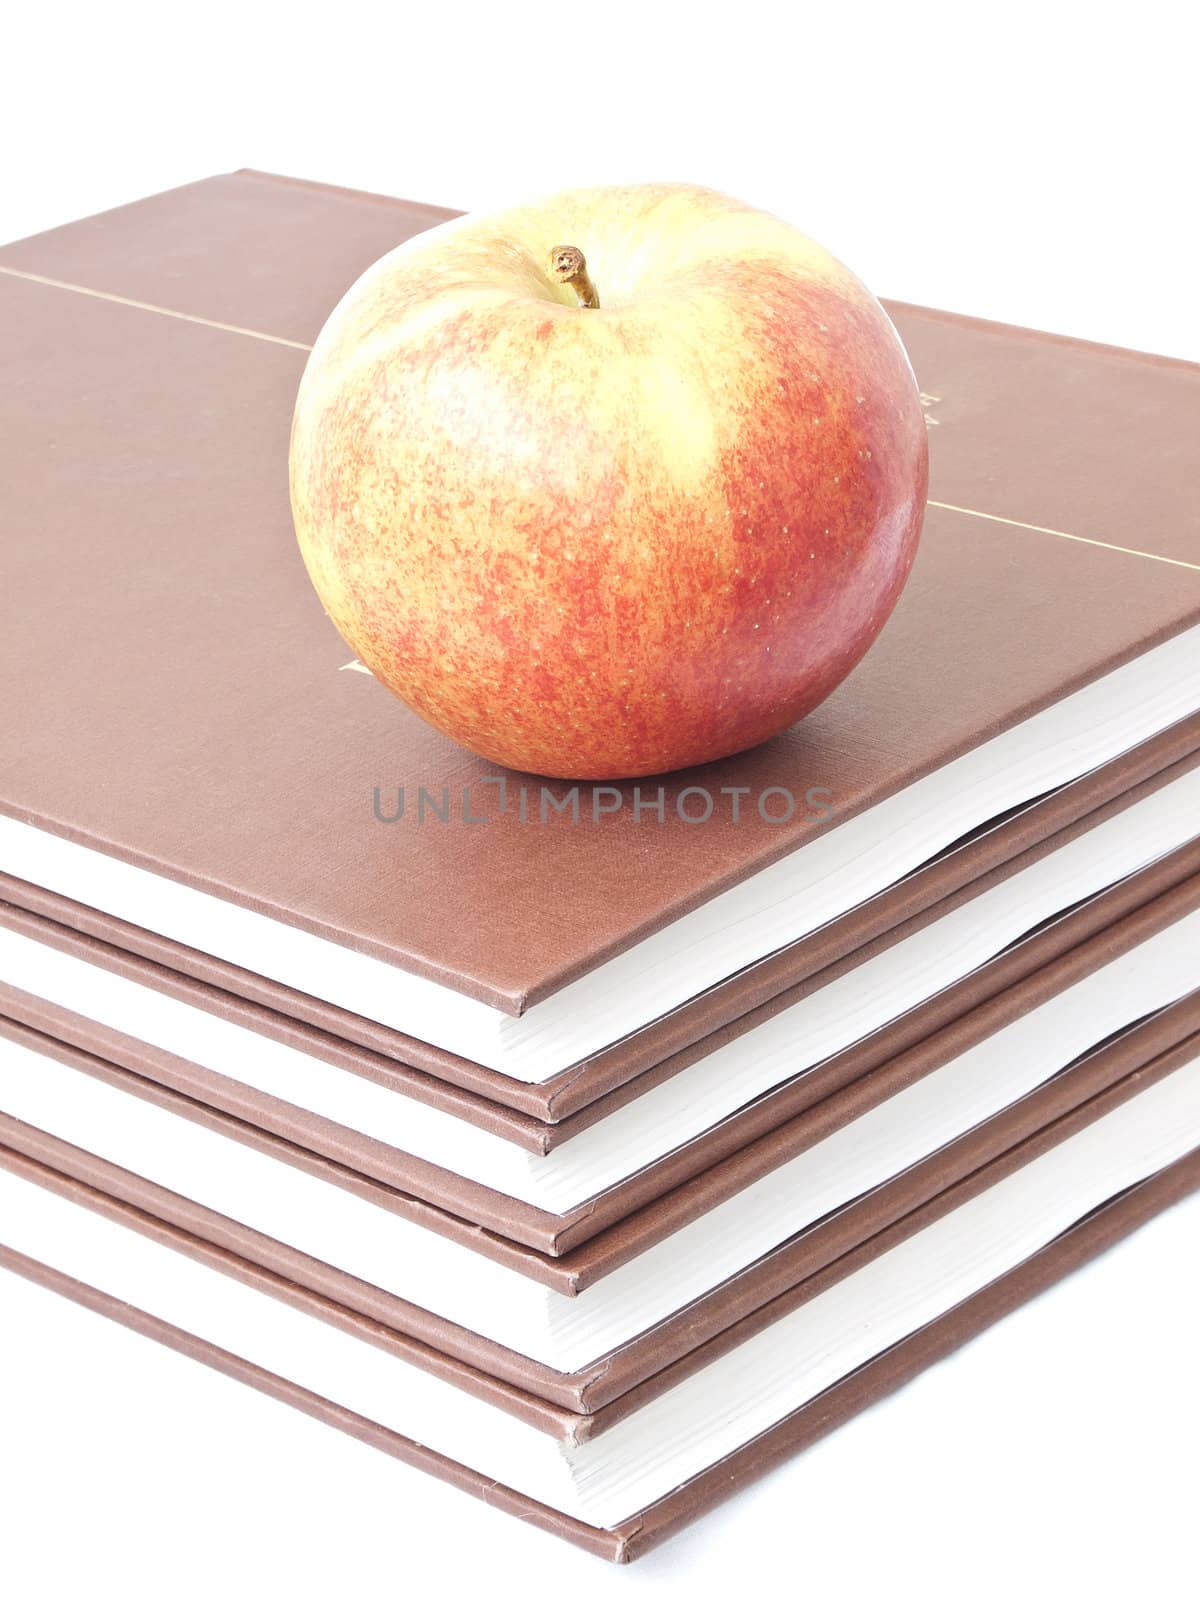 Isolated apple on a stack of four books